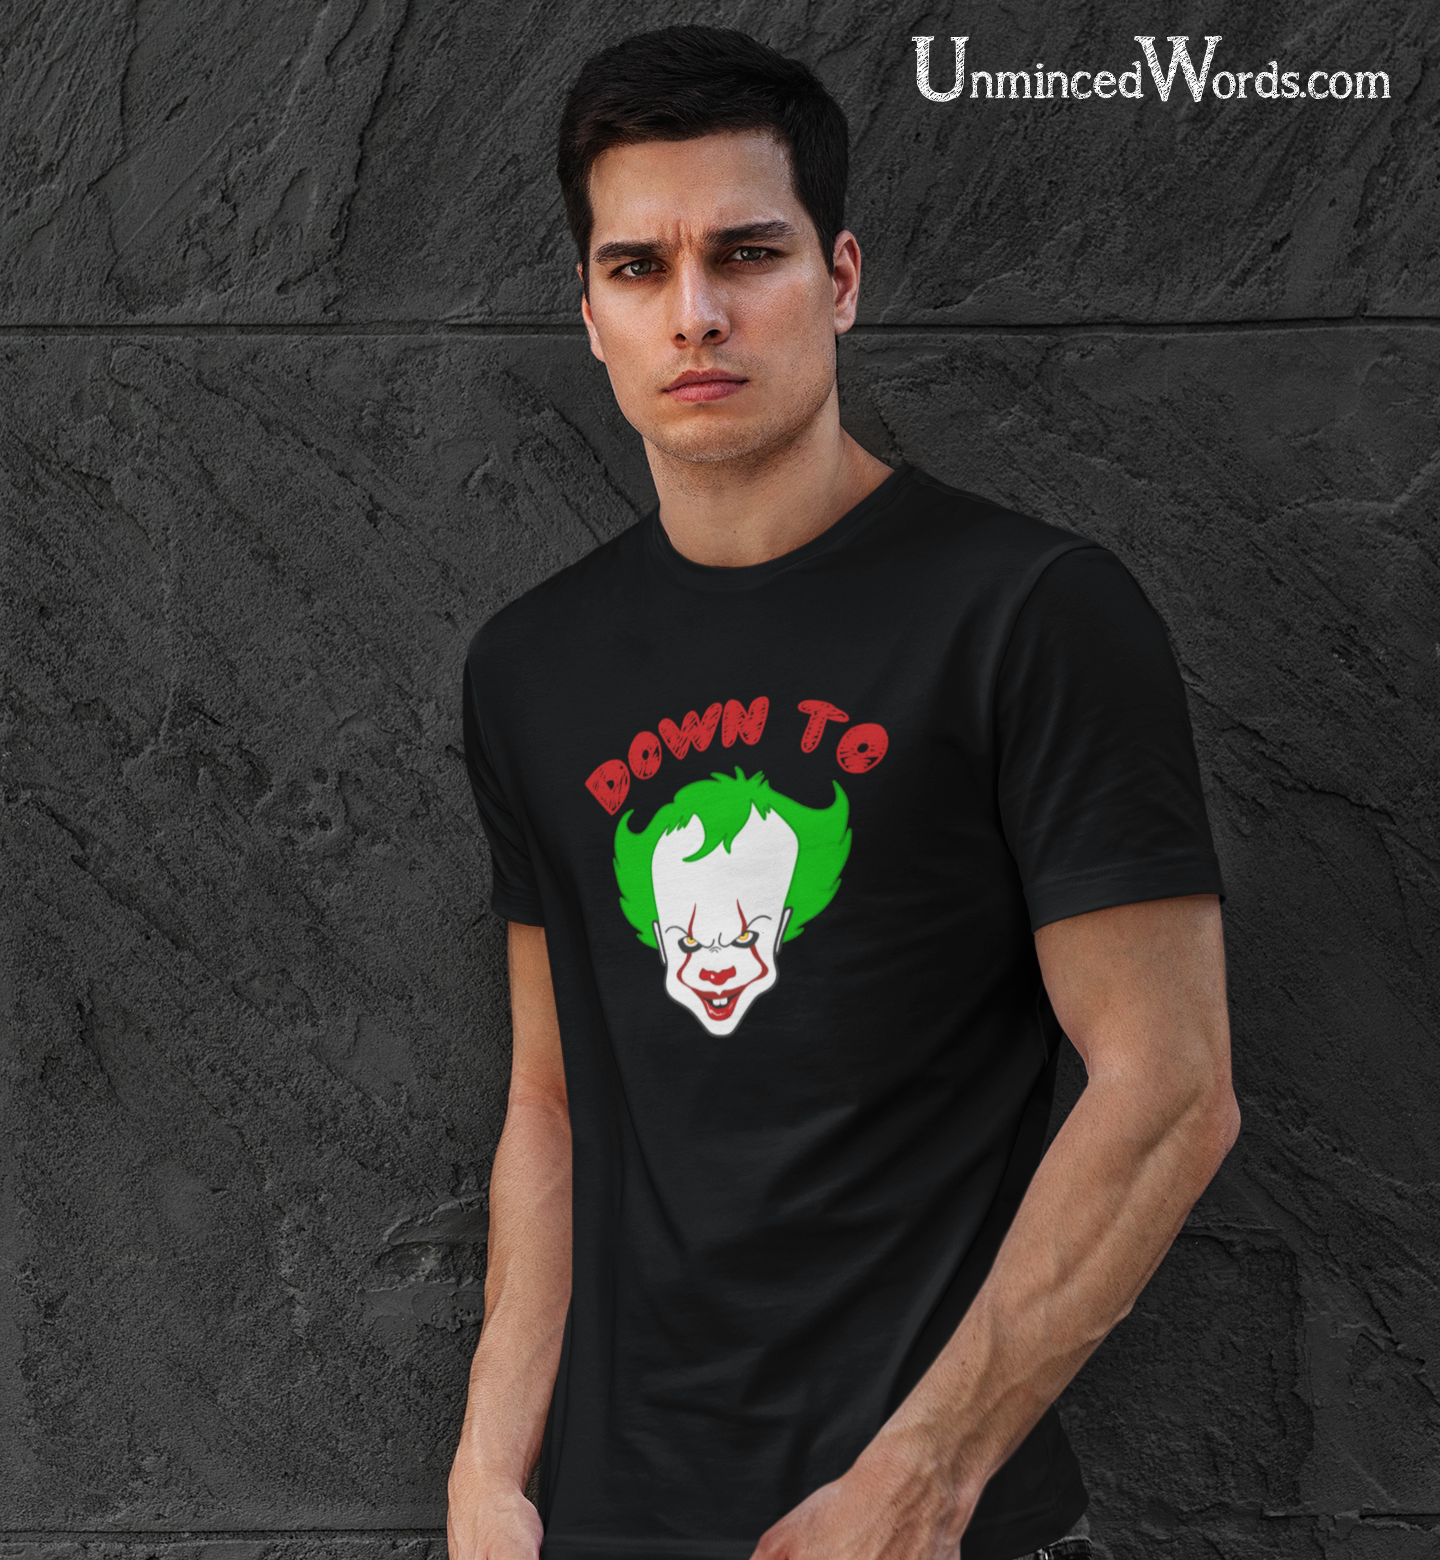 Down To Clown is our fun design for your clowny friend